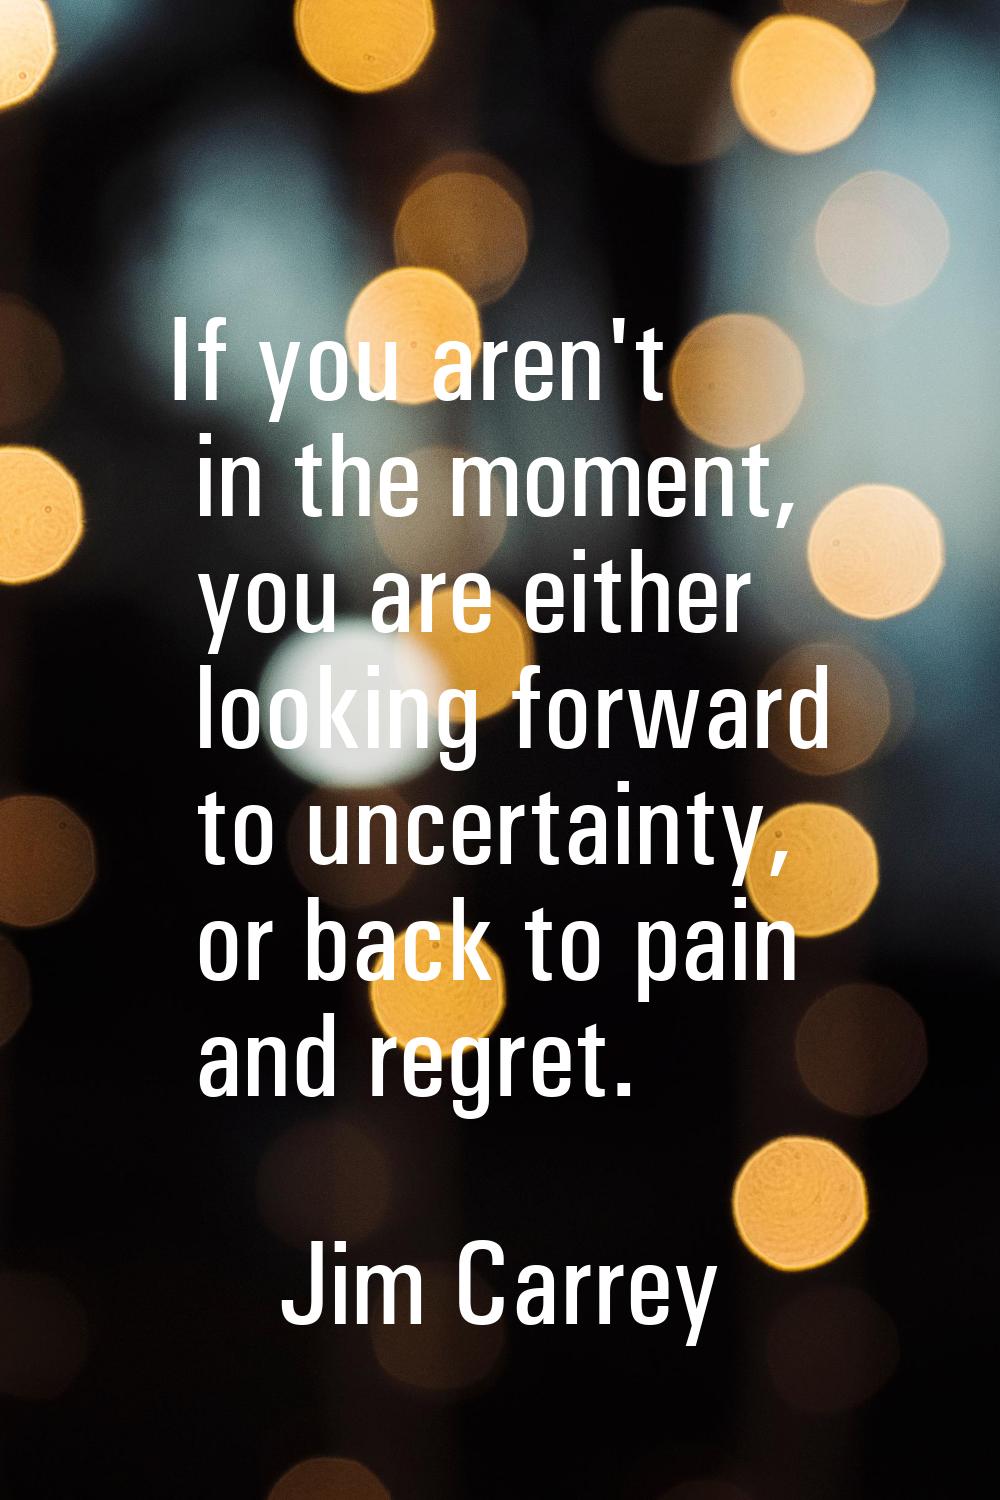 If you aren't in the moment, you are either looking forward to uncertainty, or back to pain and reg